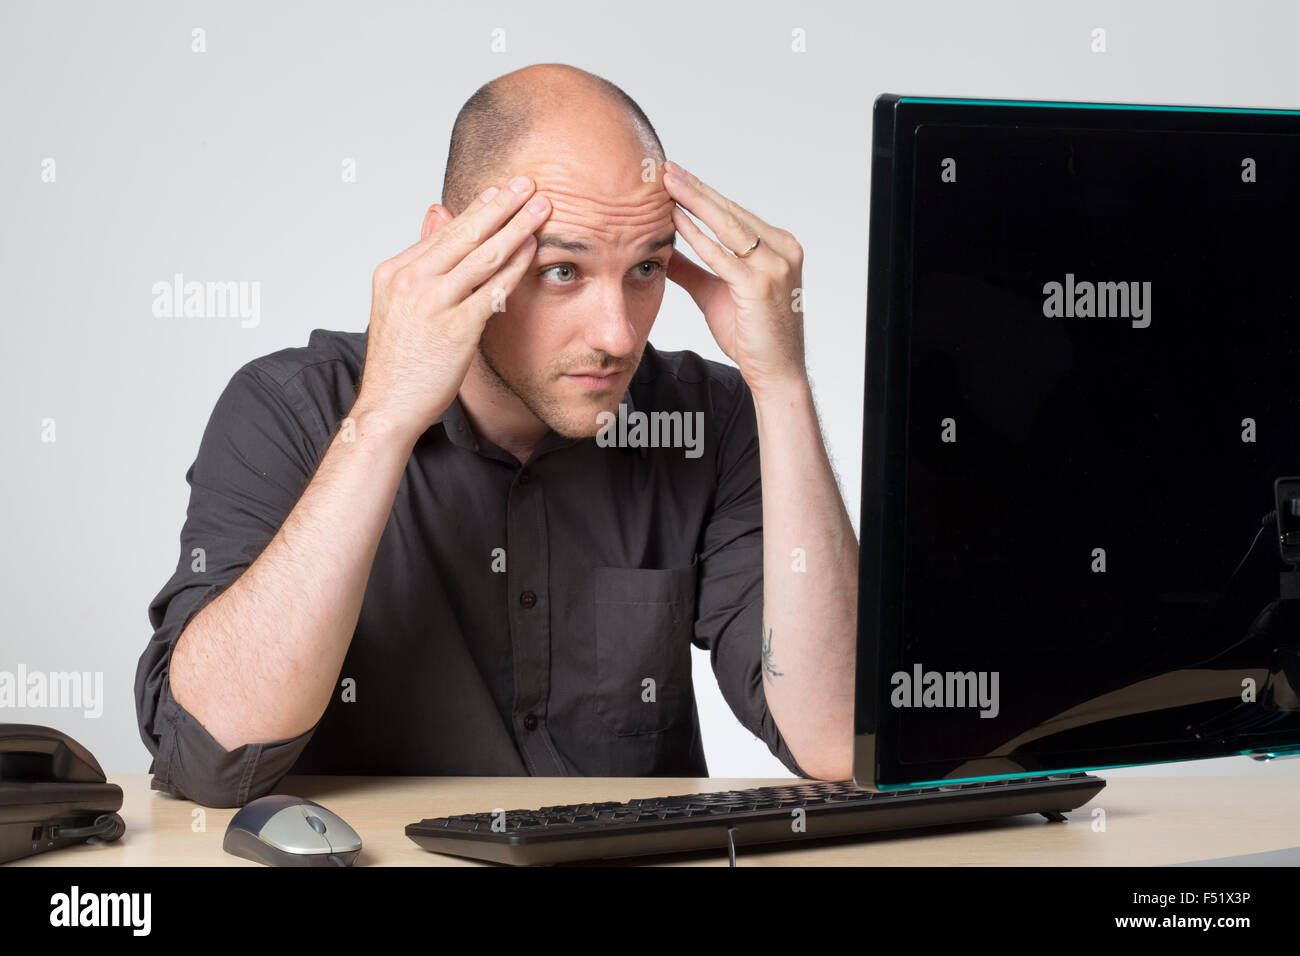 Looking at screen in disbelief Stock Photo